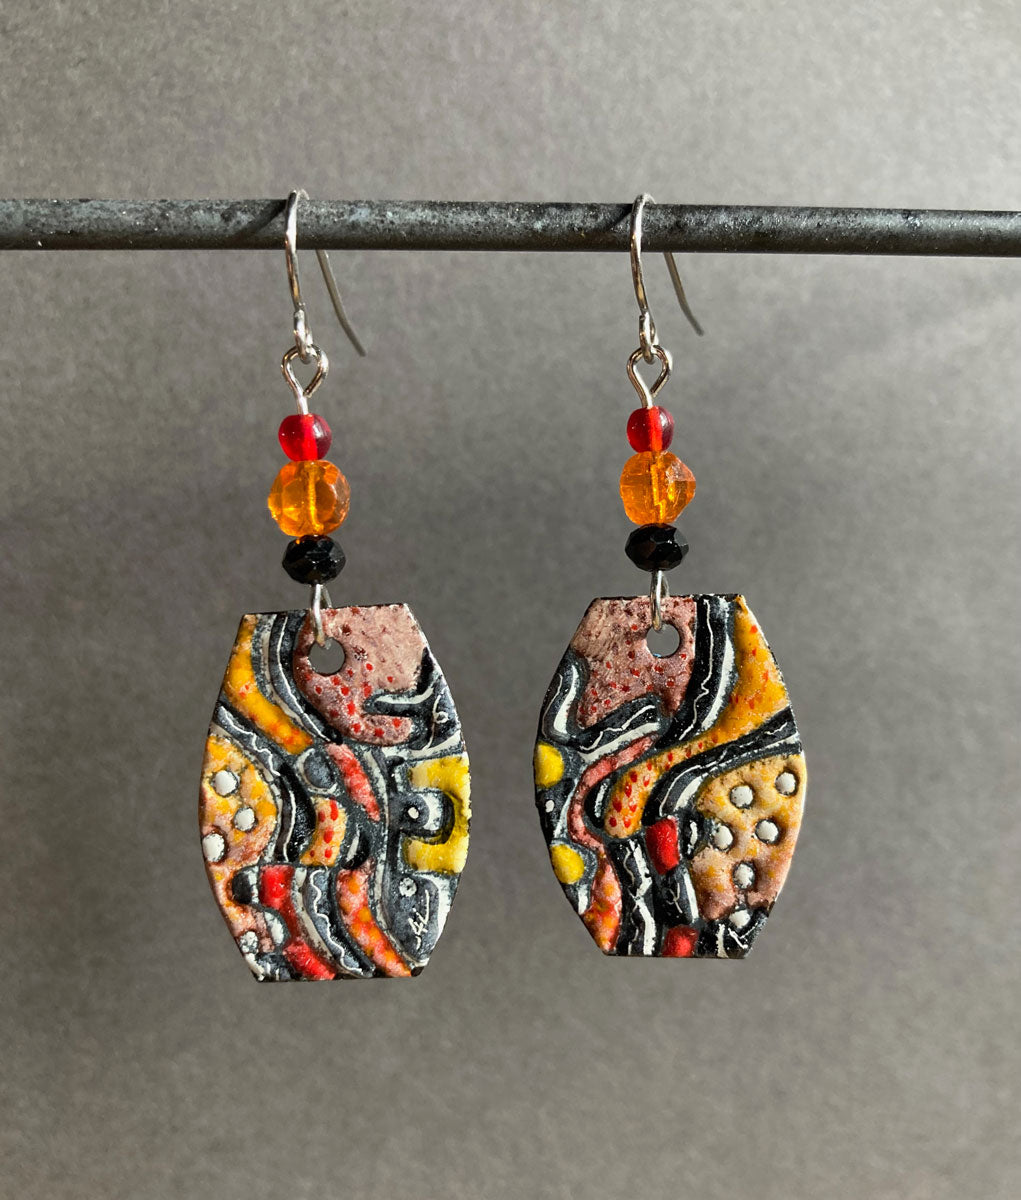 316. Abstract Party Earrings - Fall Colors